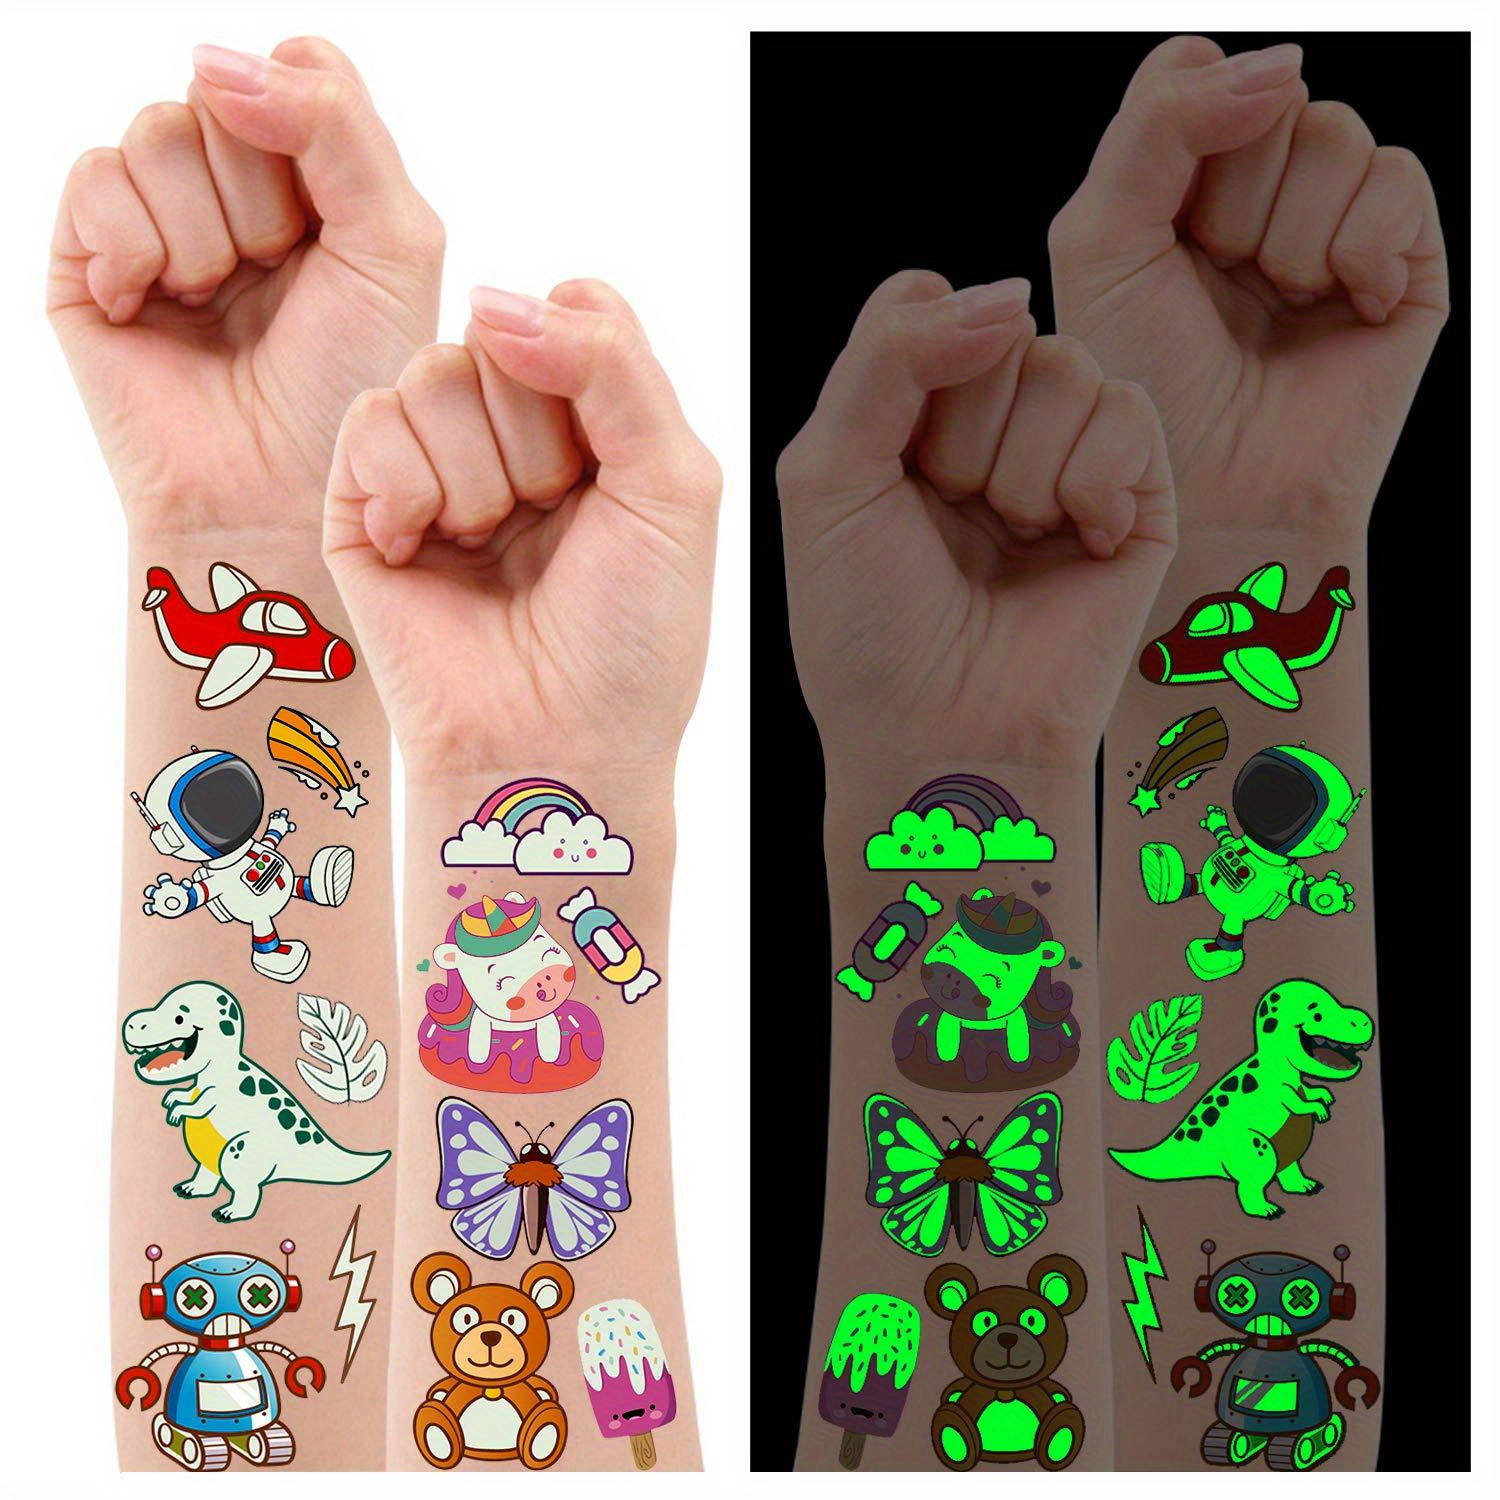 

380 Styles (30 Sheets) Luminous Tattoos Mixed Styles Temporary Tattoos Stickers With /mermaid/dinosaur/outer Space/pirate For Boys And Girls Glow Party Supplies Gifts